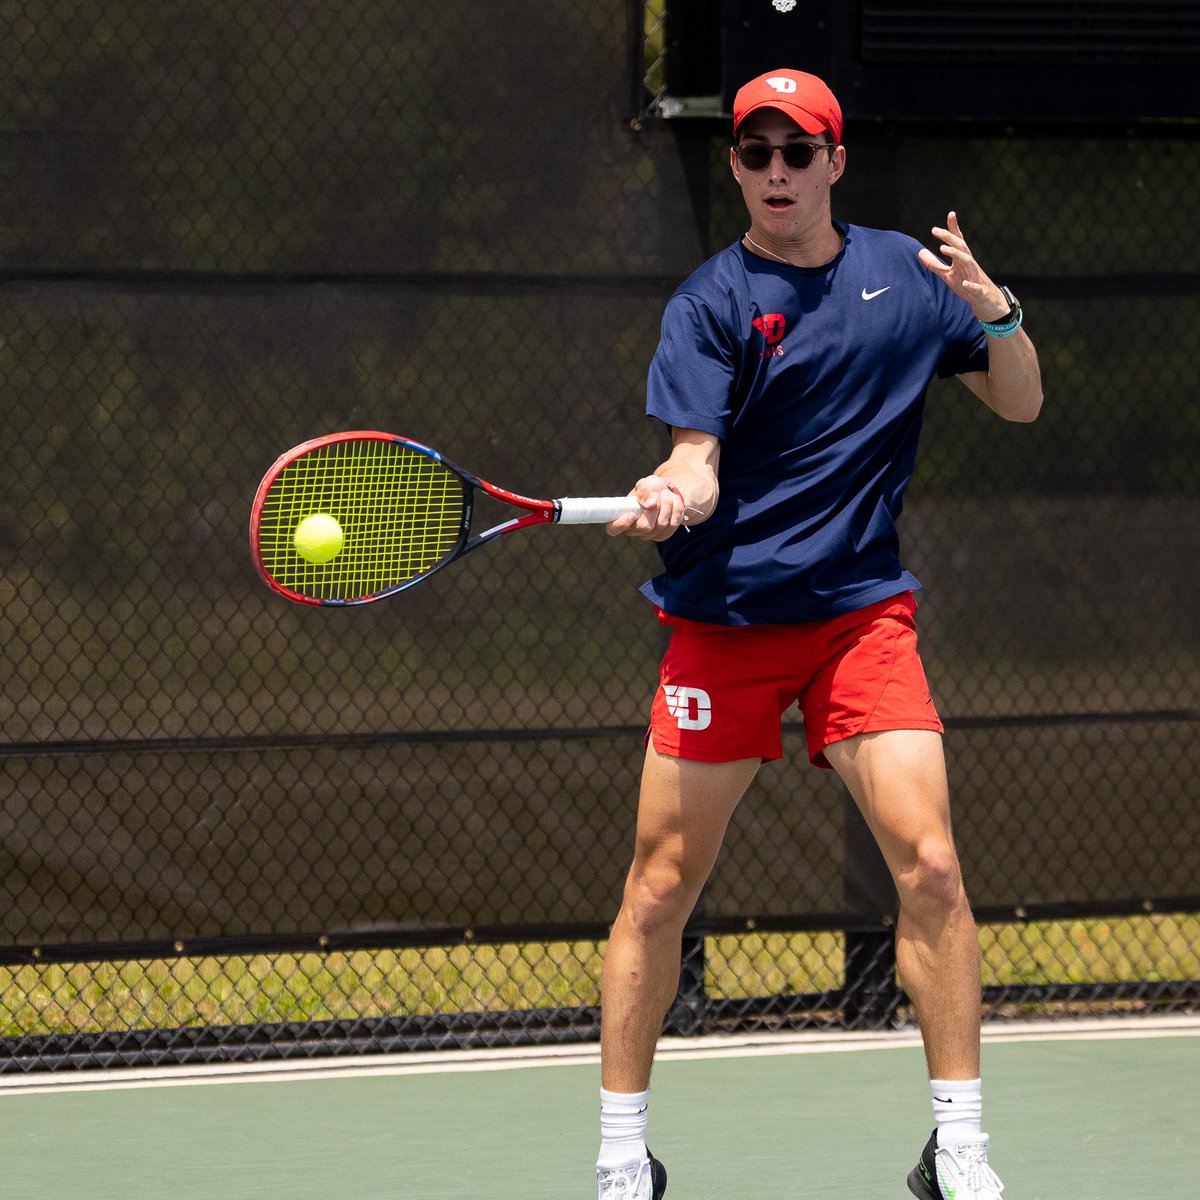 𝘿𝘼𝙔𝙏𝙊𝙉 𝙃𝙀𝘼𝘿𝙎 🔙 𝙏𝙊 𝙏𝙃𝙀 𝙁𝙄𝙉𝘼𝙇𝙎!

Kyle McNally clinches for @UDFlyerTennis in a 4-0 sweep to earn a spot in the #A10MTEN Championship final